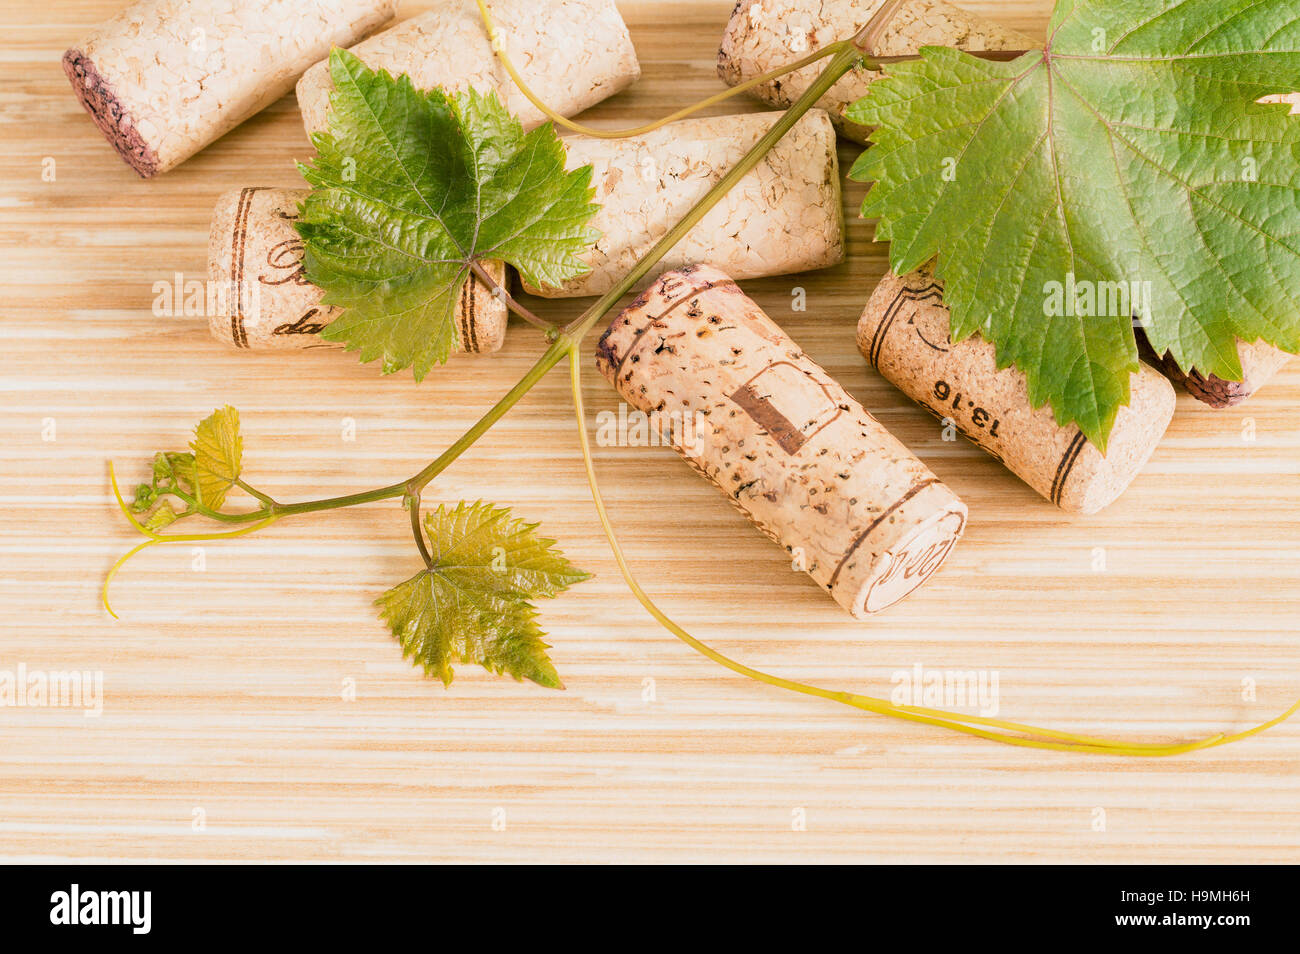 Composition of wine corks with grape vine and leaves on wooden t Stock Photo